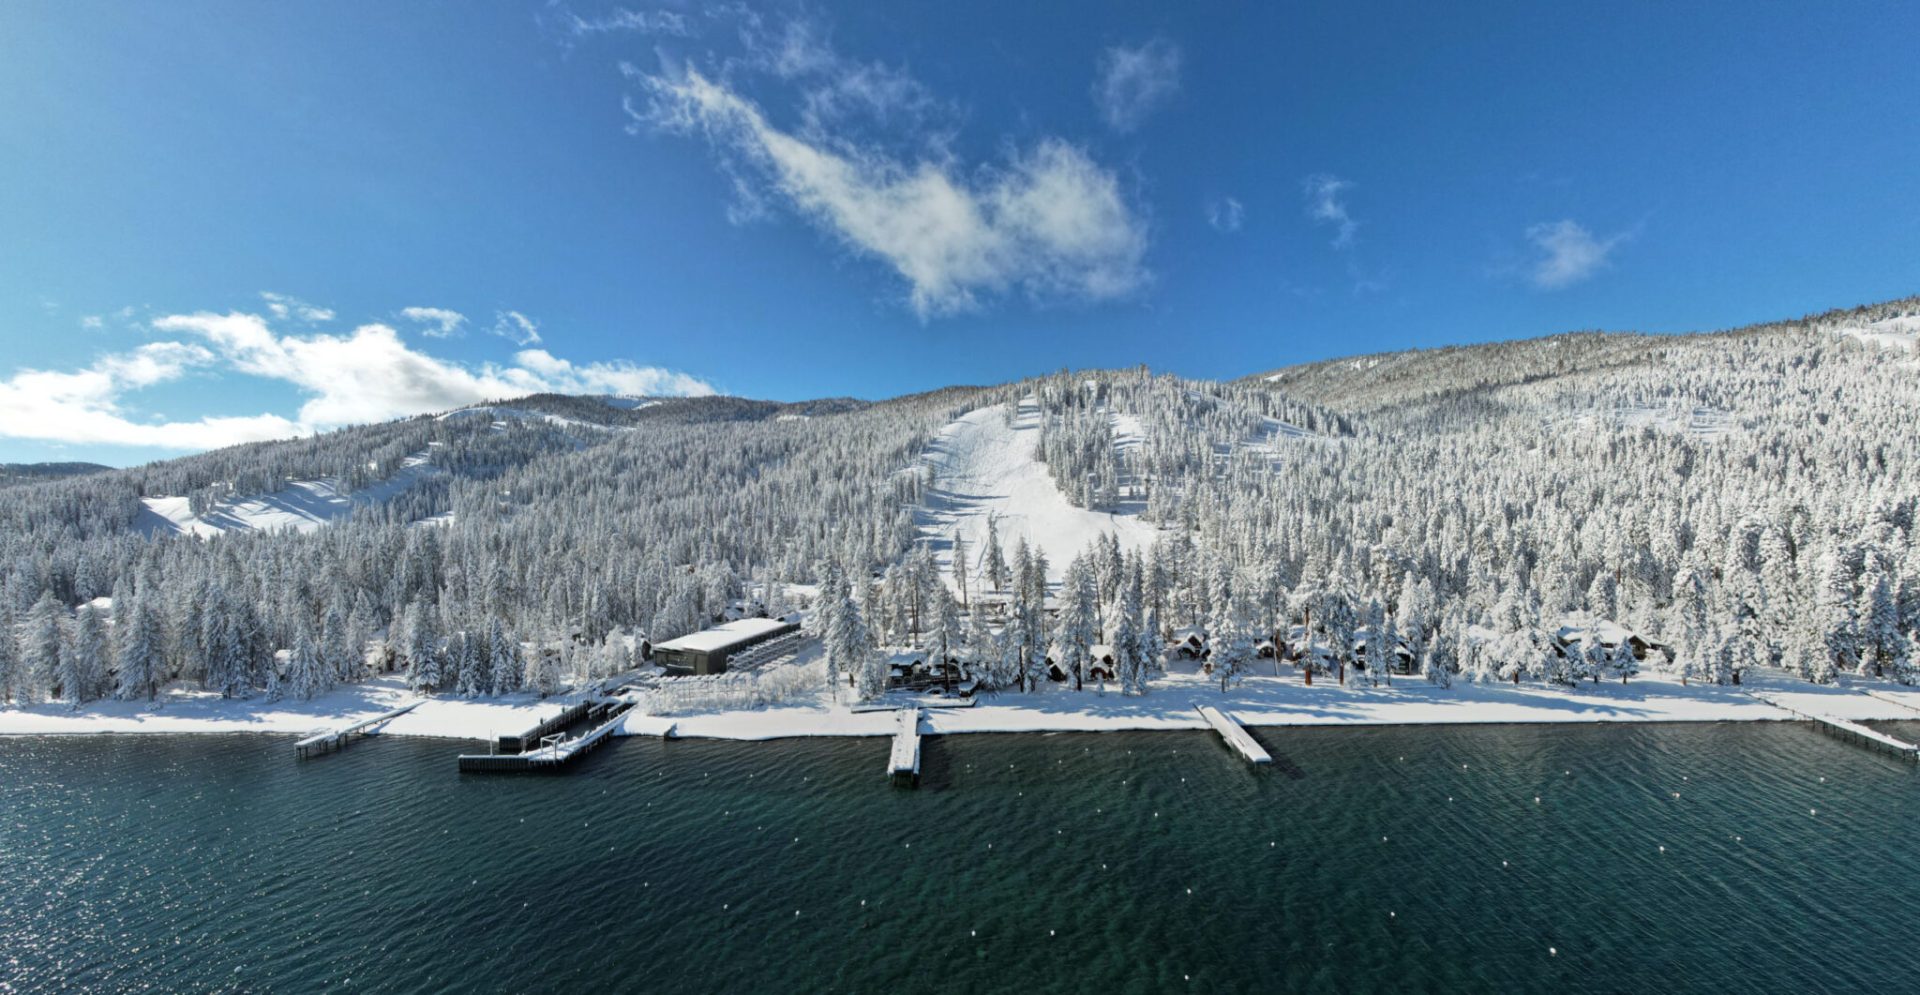 A view of Homewood Mountain Resort from Lake Tahoe. Photo Credit: Homewood Mountain Resort